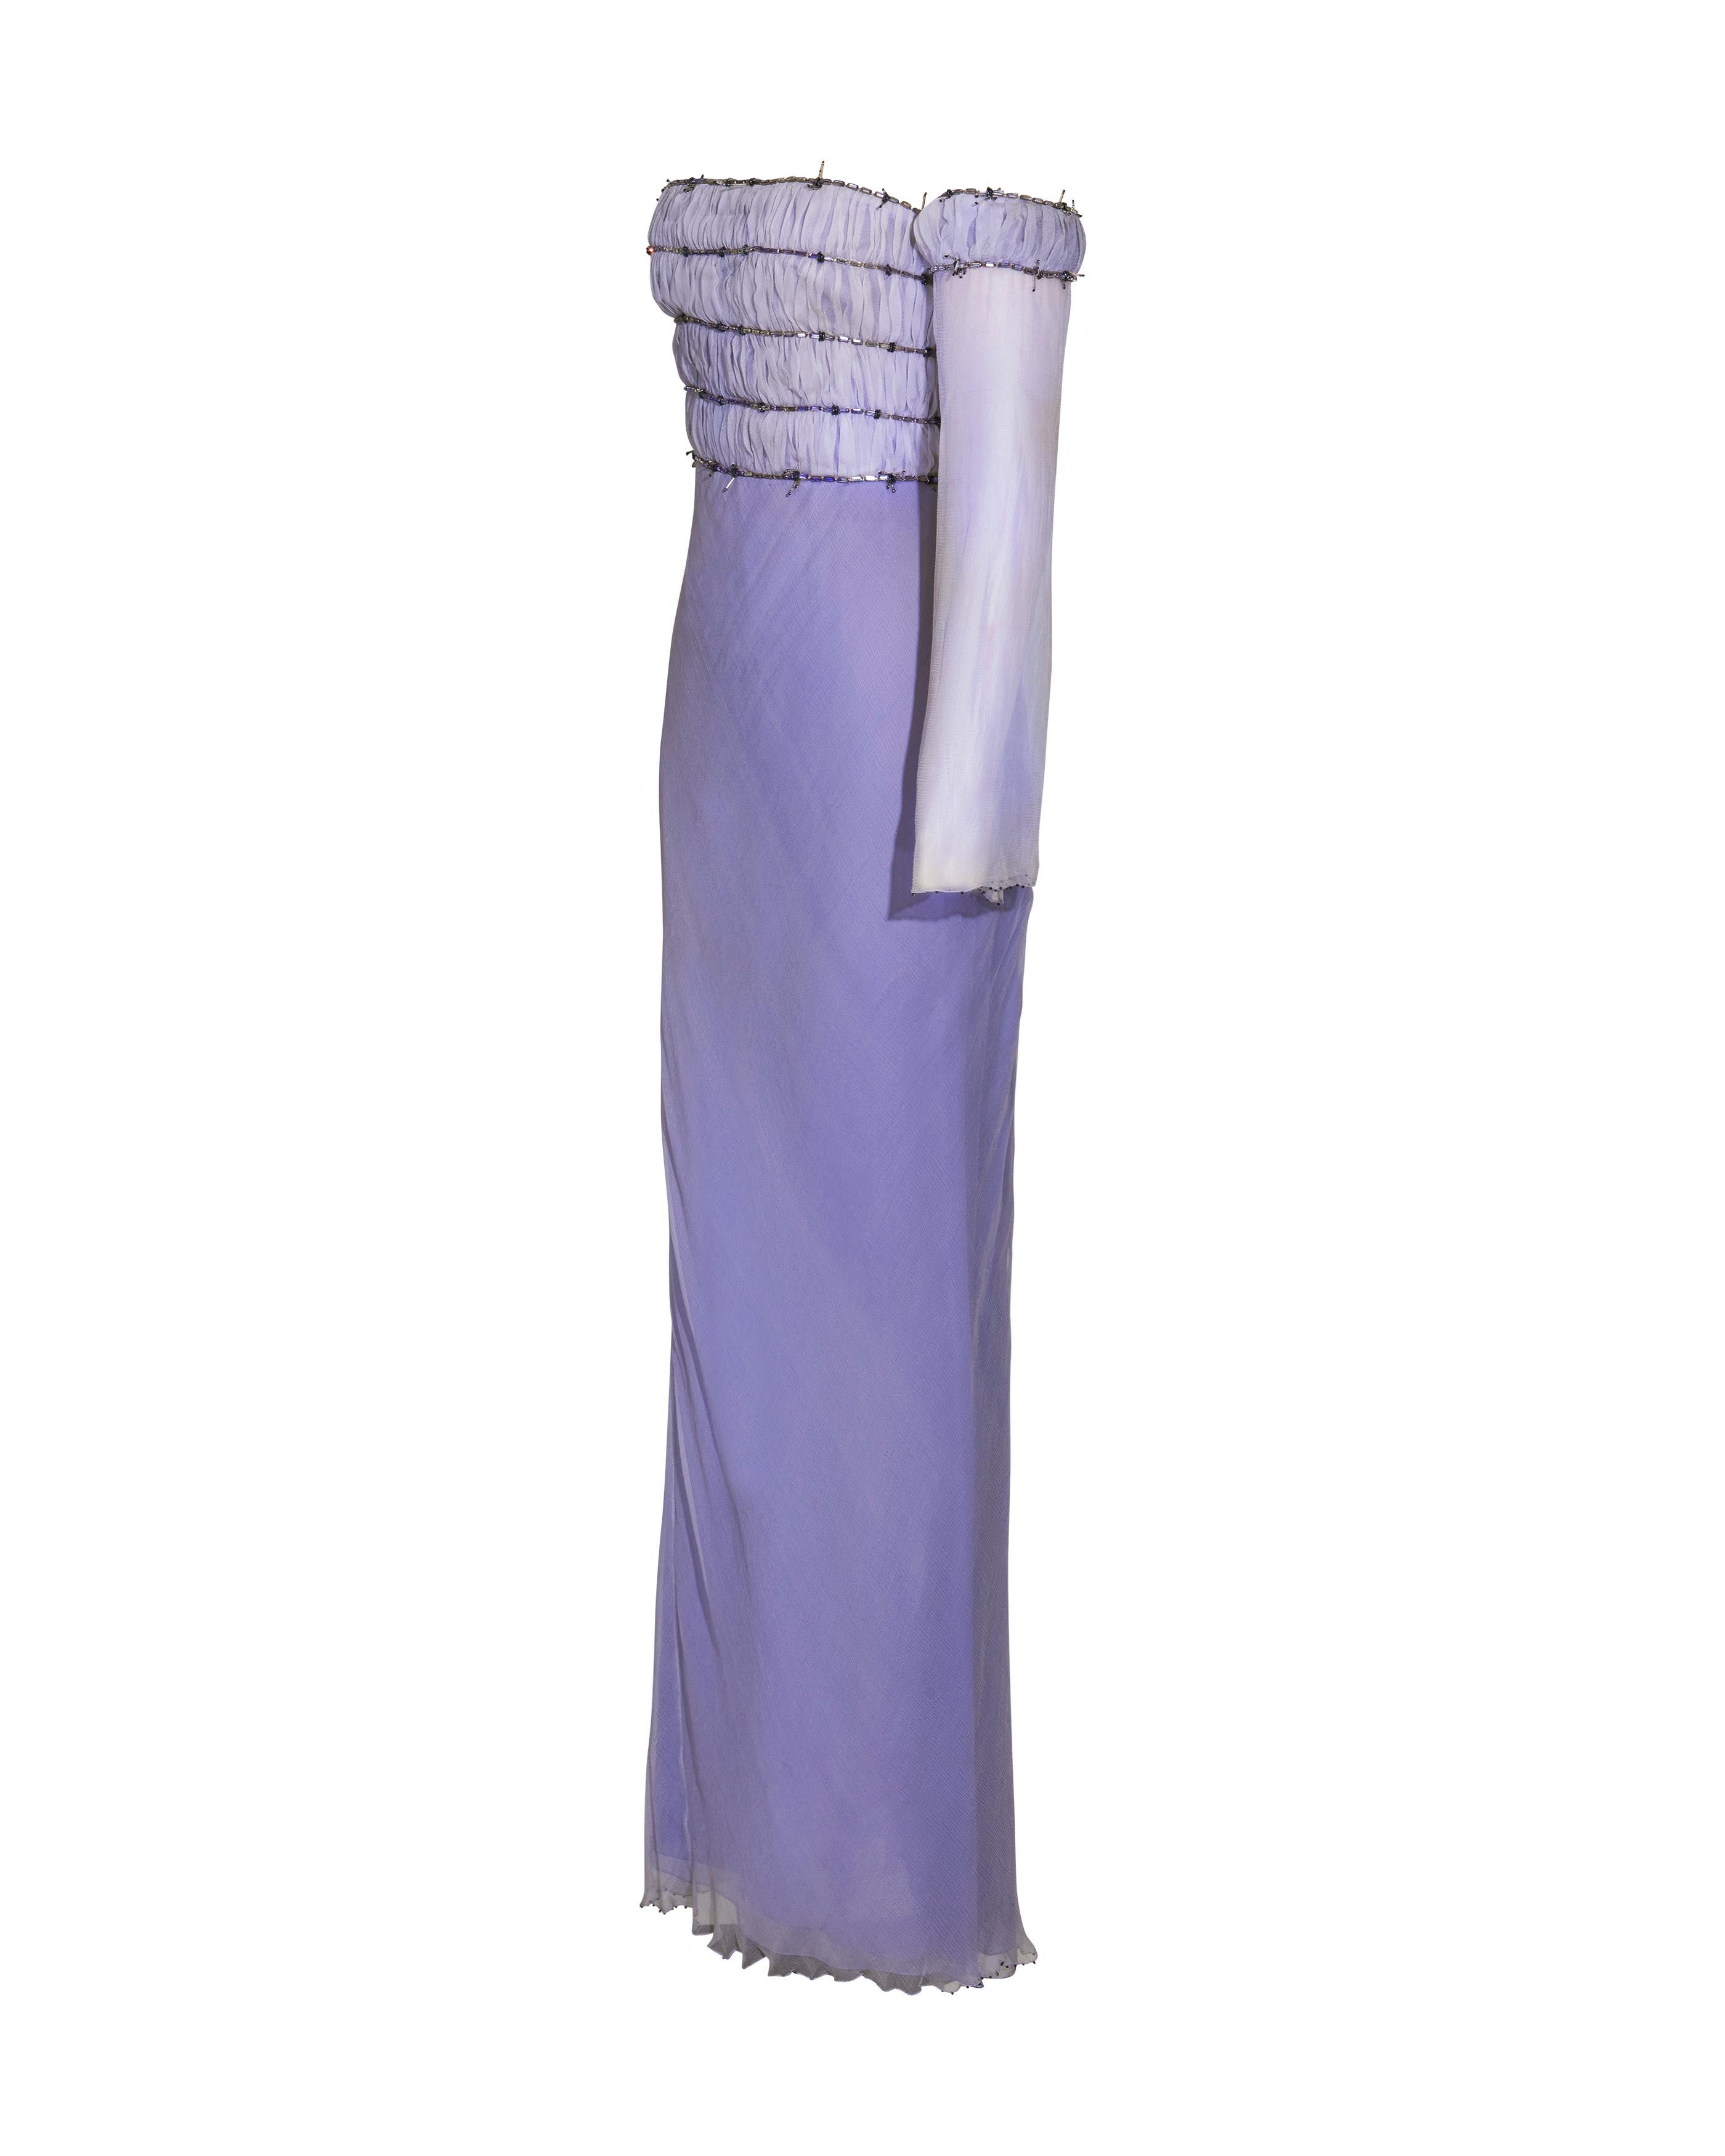 A/W 1998 Gianni Versace Purple Strapless One-Shoulder 'Barbed Wire' Gown In Excellent Condition In North Hollywood, CA